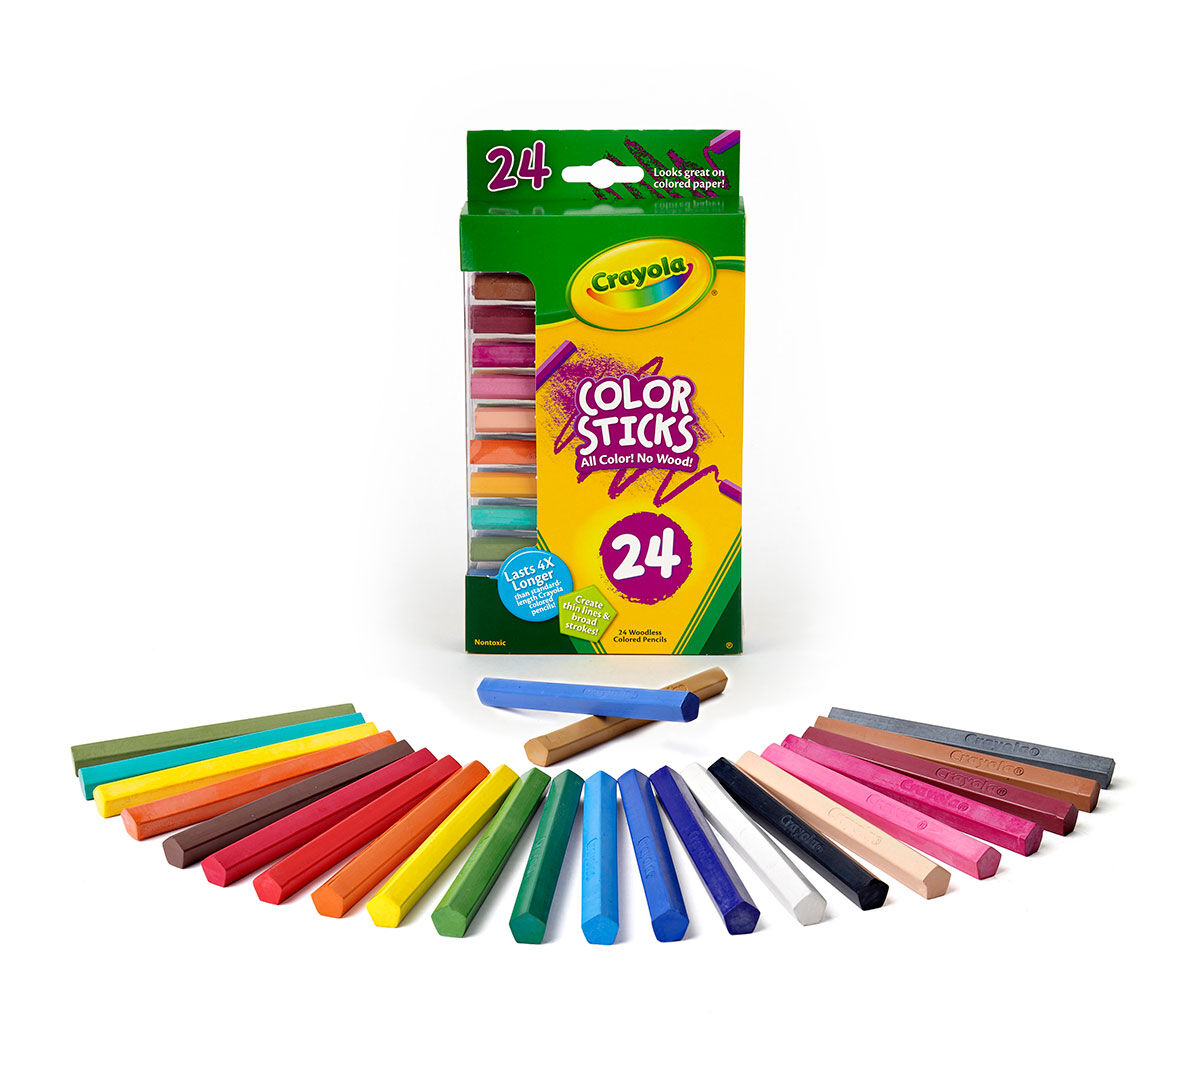 Toys & Games Colors of The World Crayola Colored Pencils 24 Pack